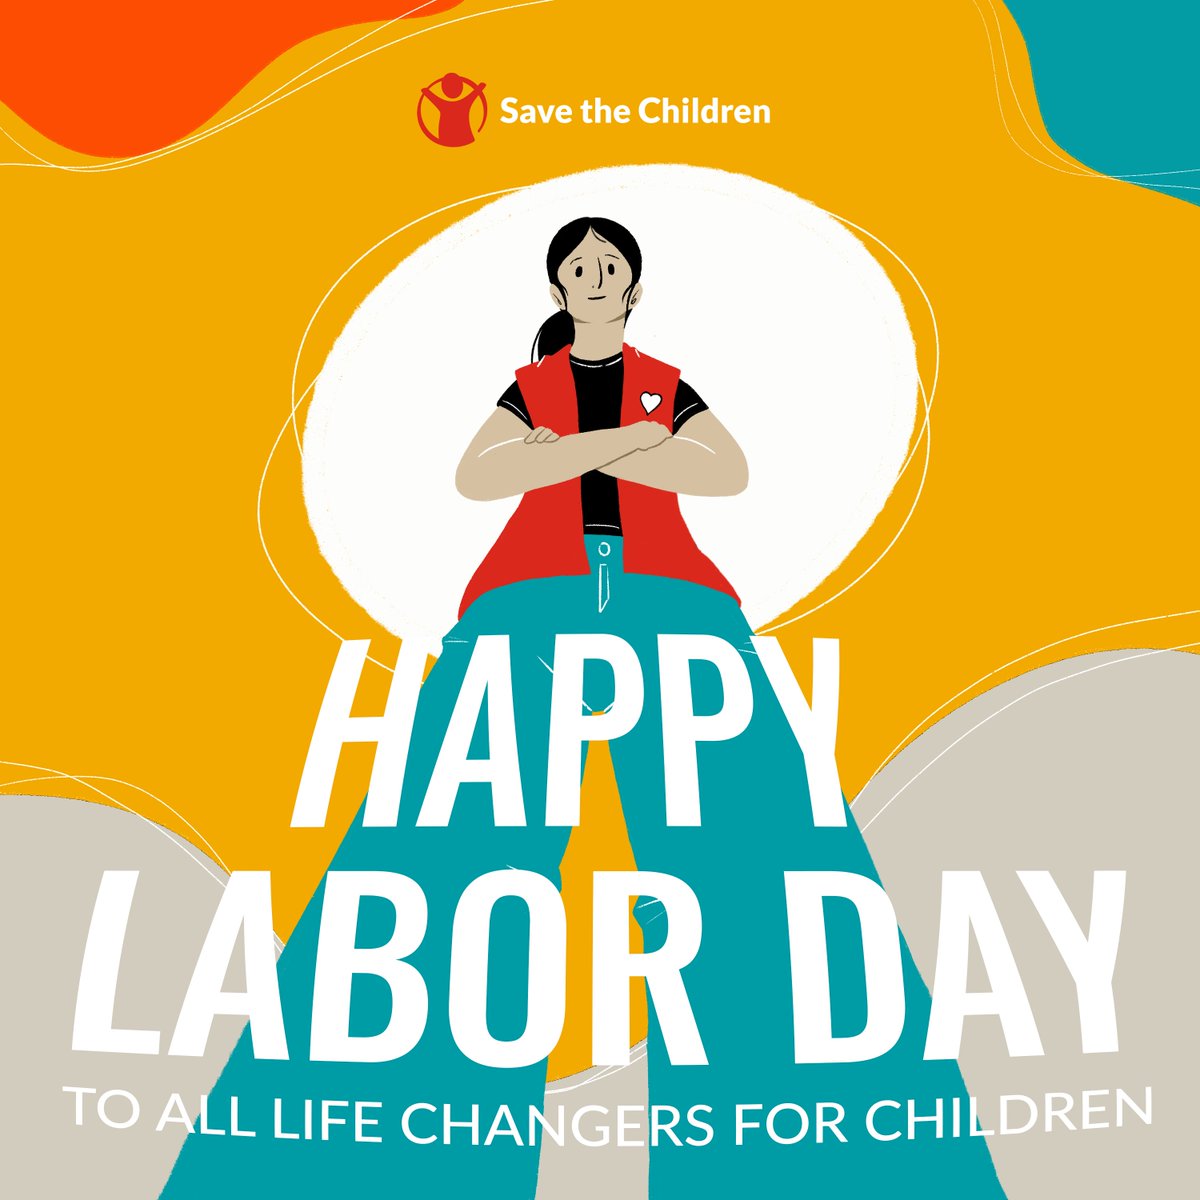 Happy Labor Day to all the #LifeChangersForChildren tirelessly working to build a better world for Filipino kids and youth. This mission will not be possible without you! Stand with us and our cause #ForAndWithChildren. Discover how: bit.ly/KindnessCircles #KindnessCircles